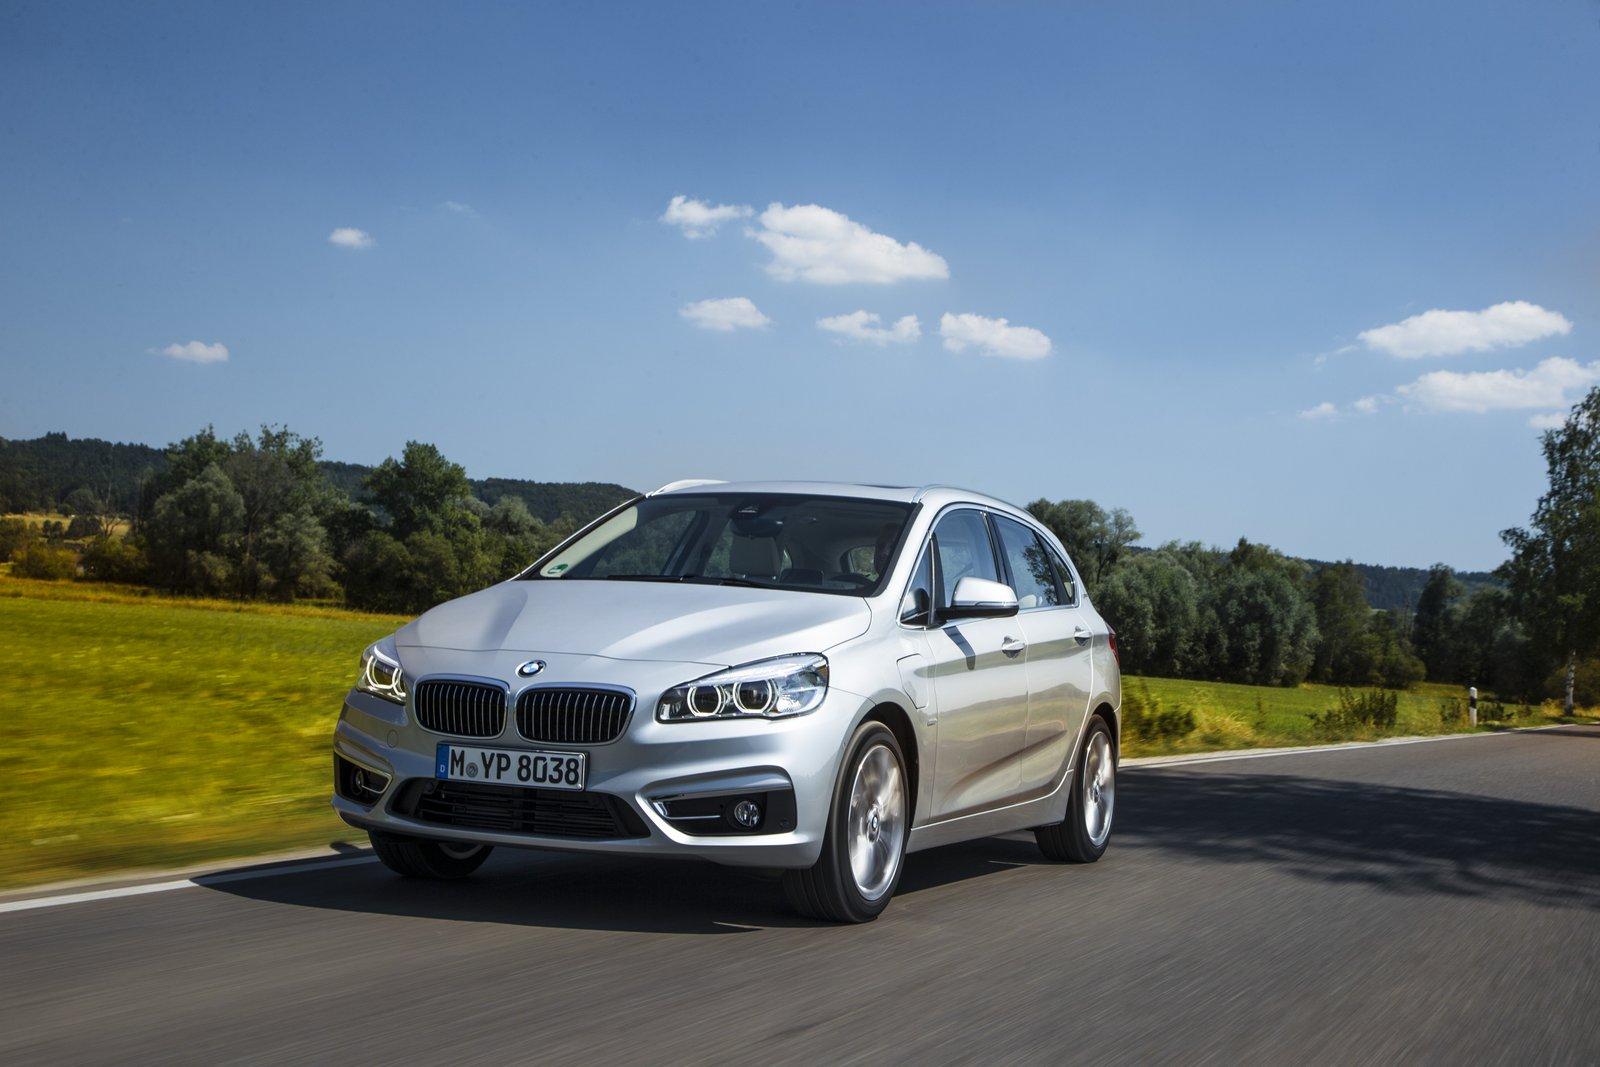 2016 BMW 225xe RESM GALERS